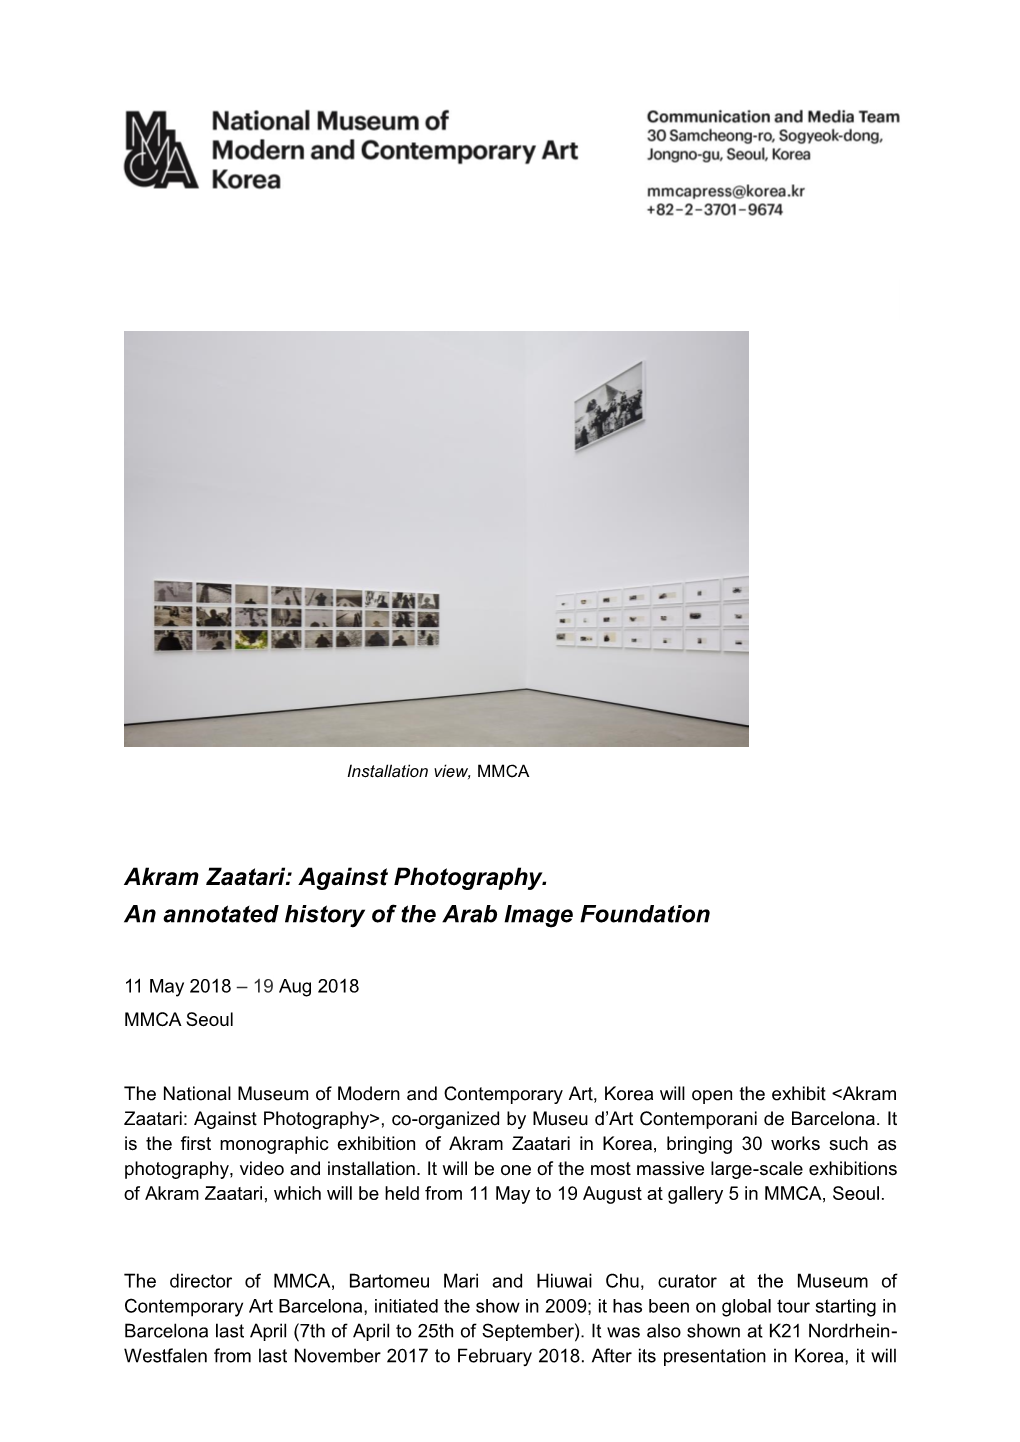 Akram Zaatari: Against Photography. an Annotated History of the Arab Image Foundation